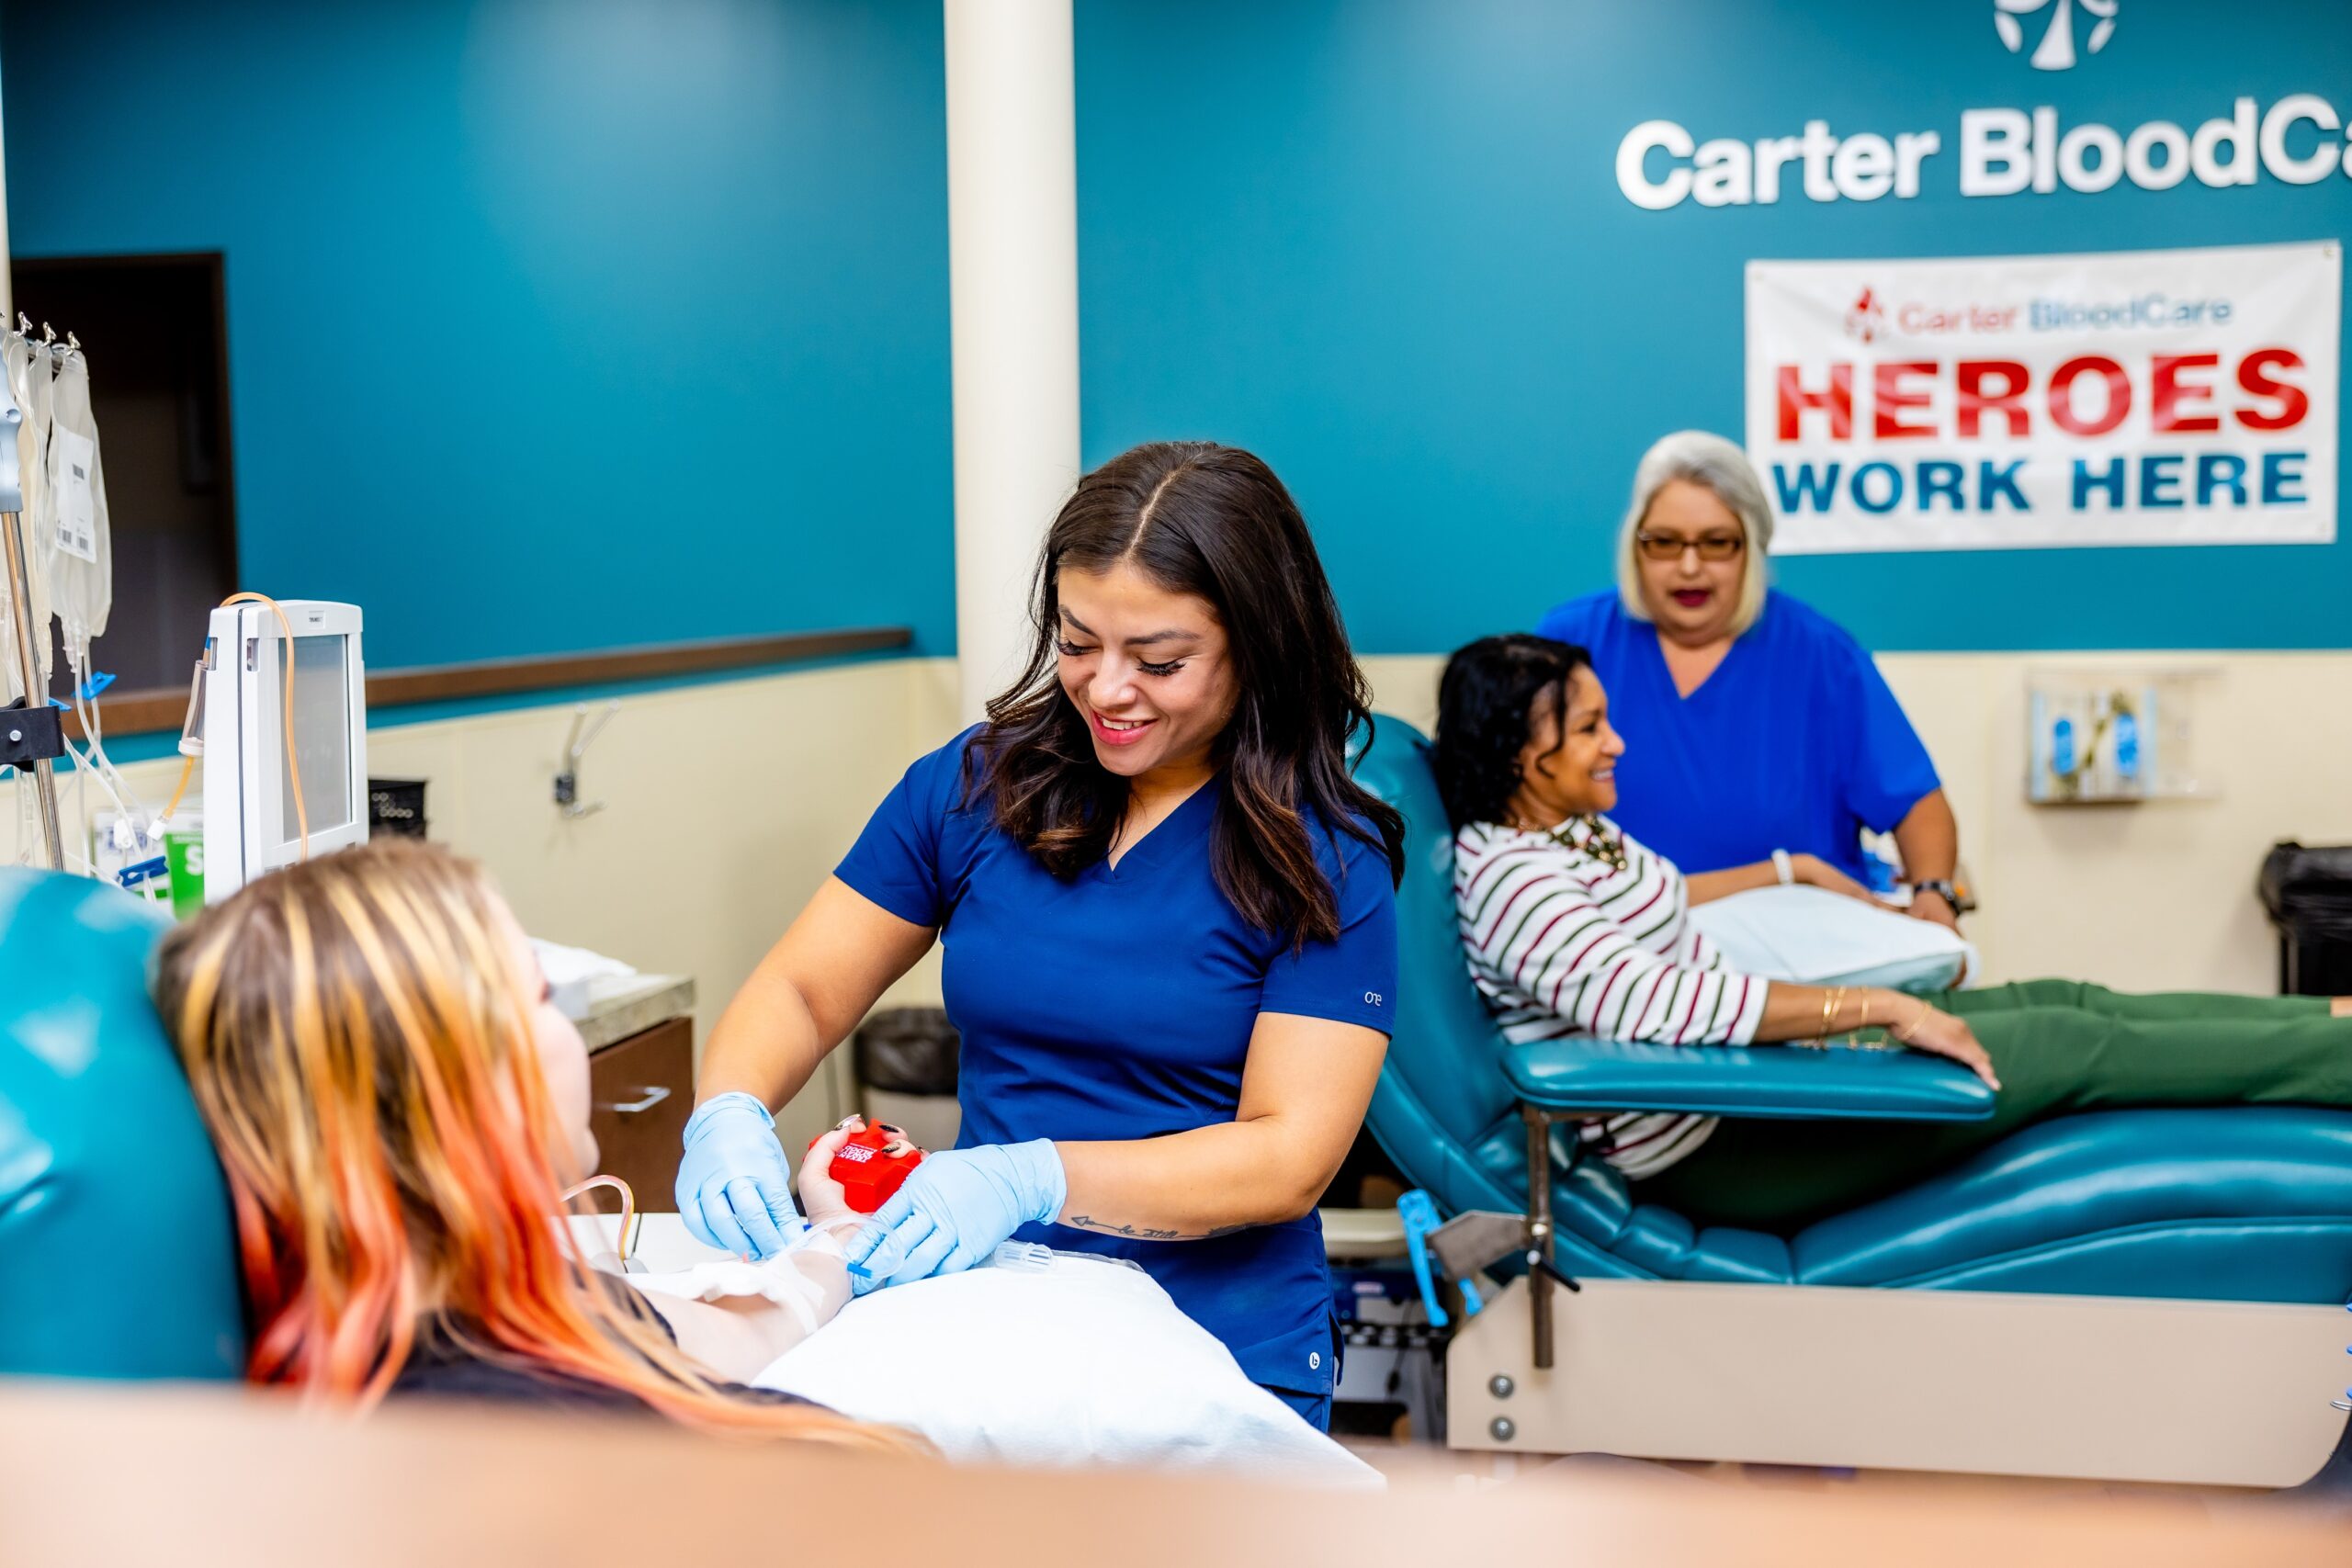 Dallas Cowboys and Carter BloodCare announce partnership